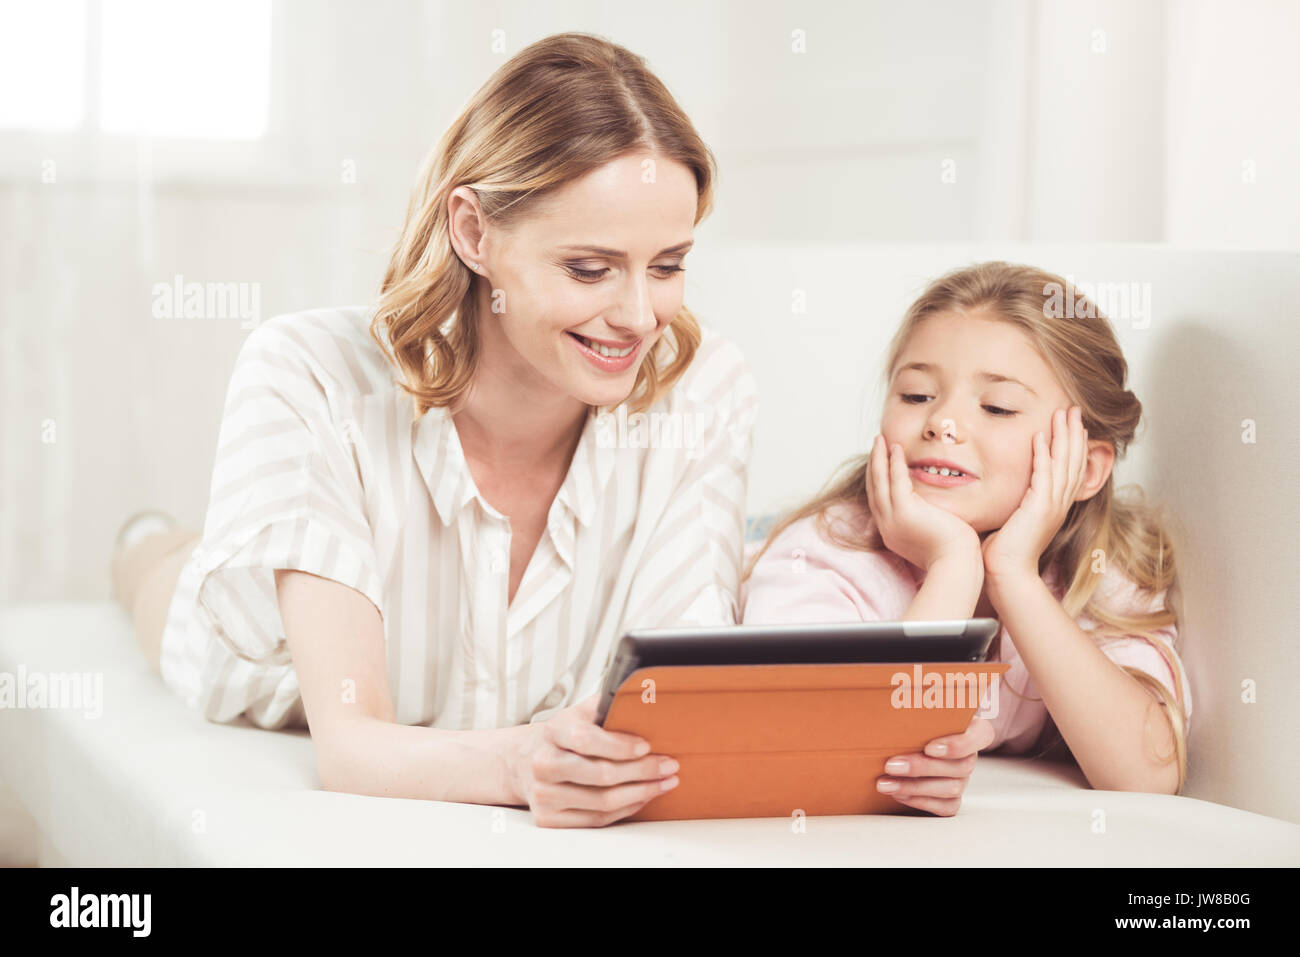 Smiling mother and daughter using digital tablet while sitting on sofa at home Banque D'Images